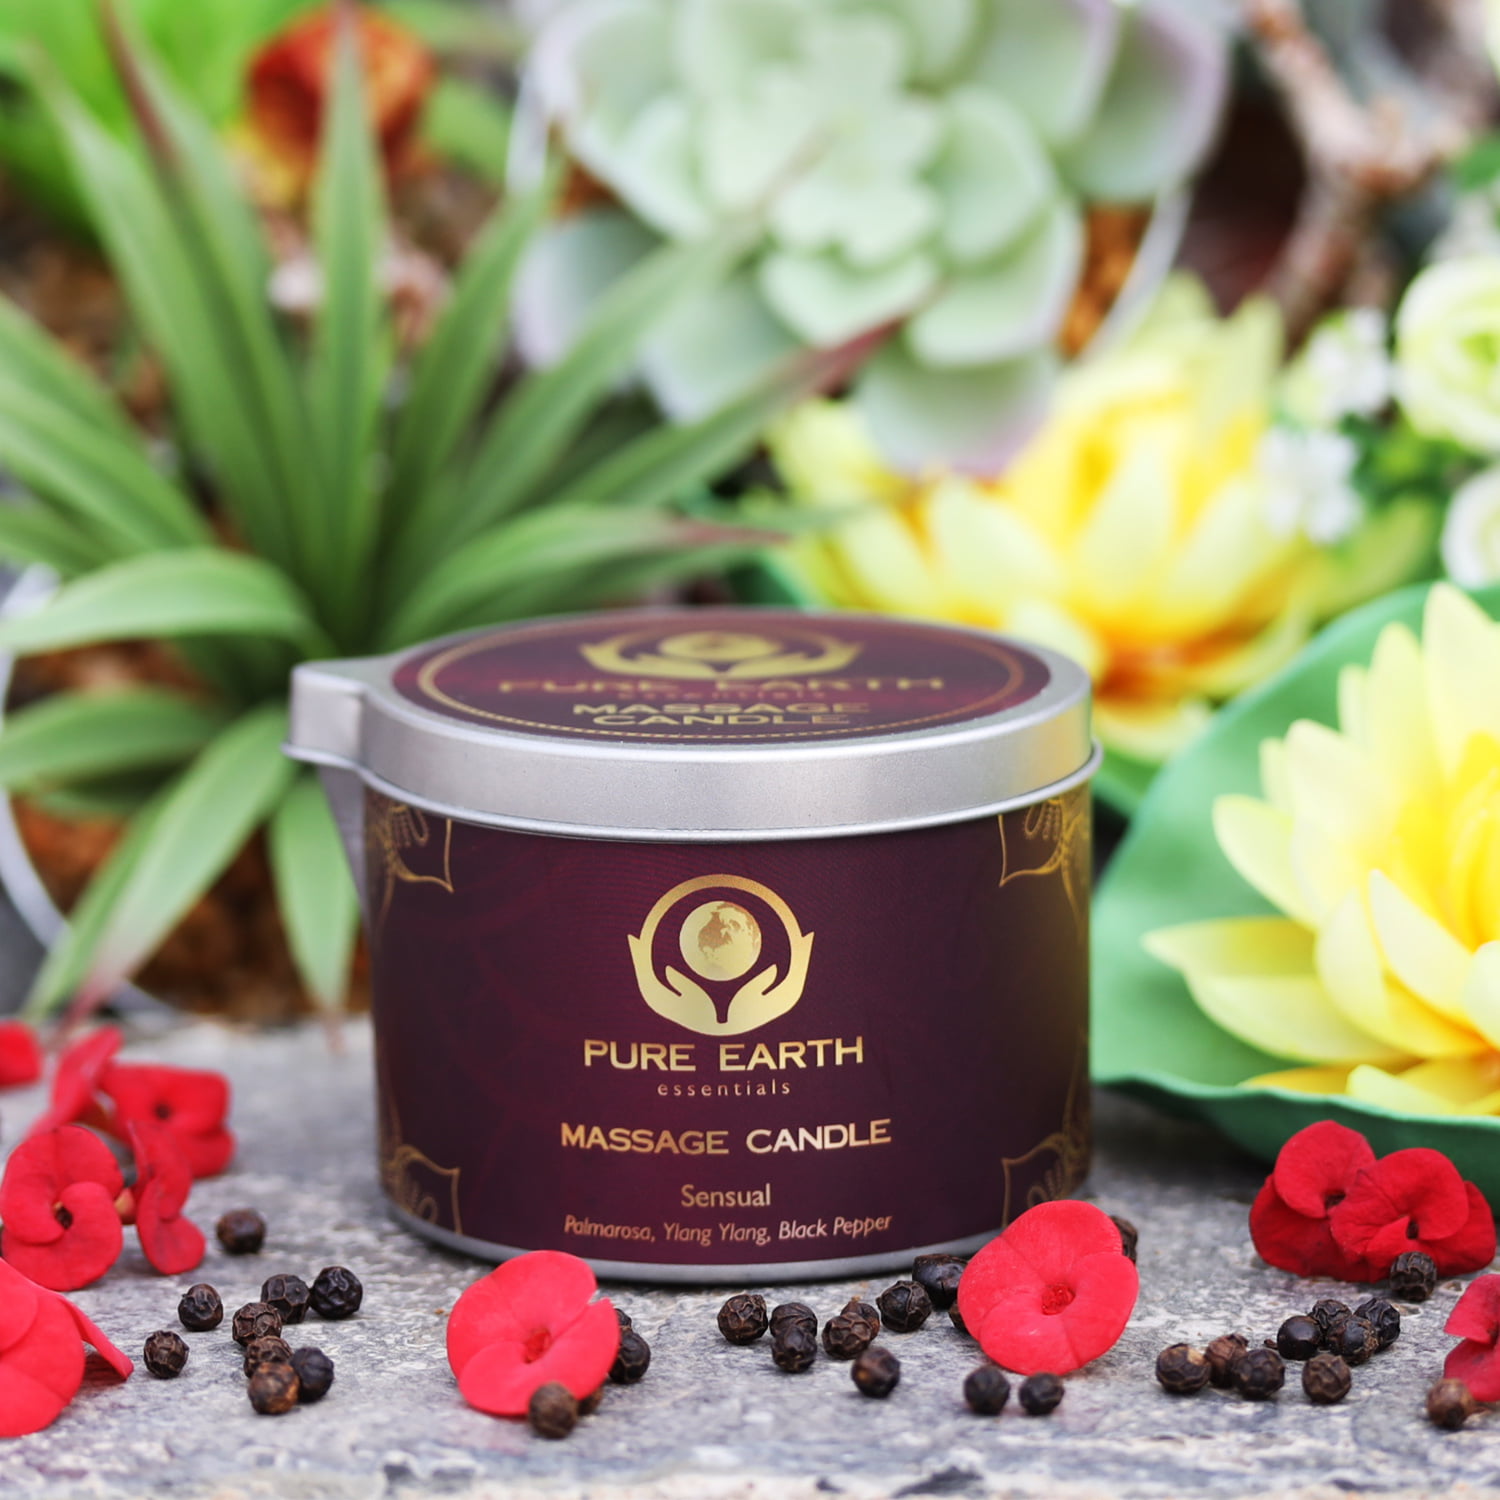 10 best all-natural massage candles for a romantic evening in